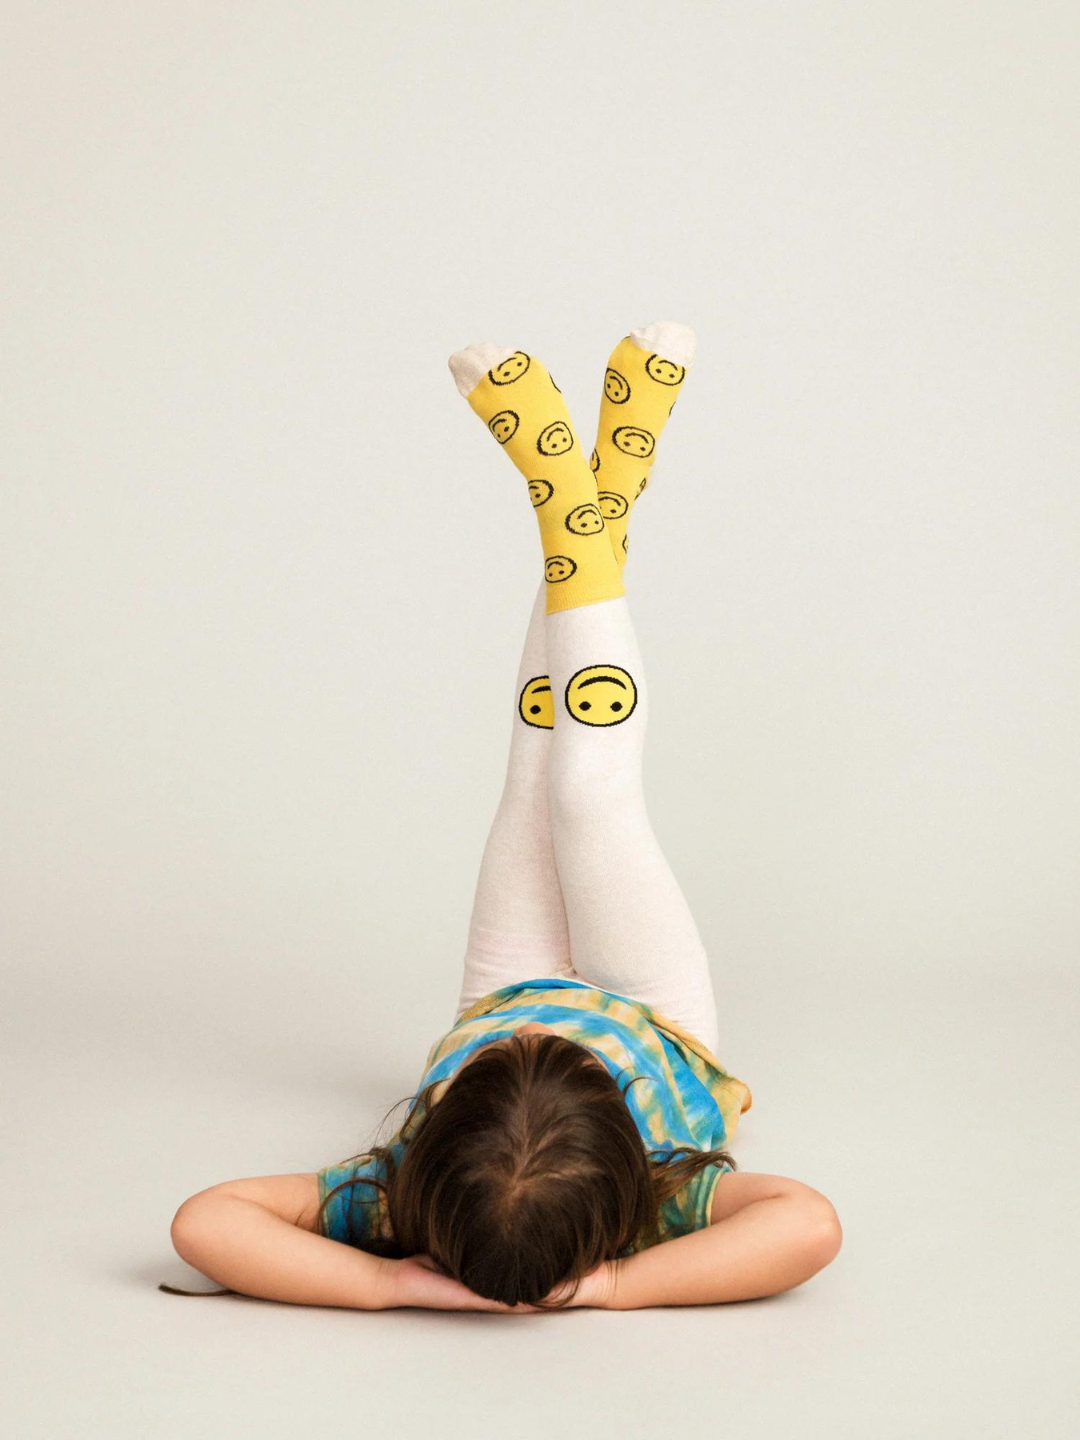 A child with her legs crossed in the air, wearing a pair of kids' ankle socks in yellow with black smileys